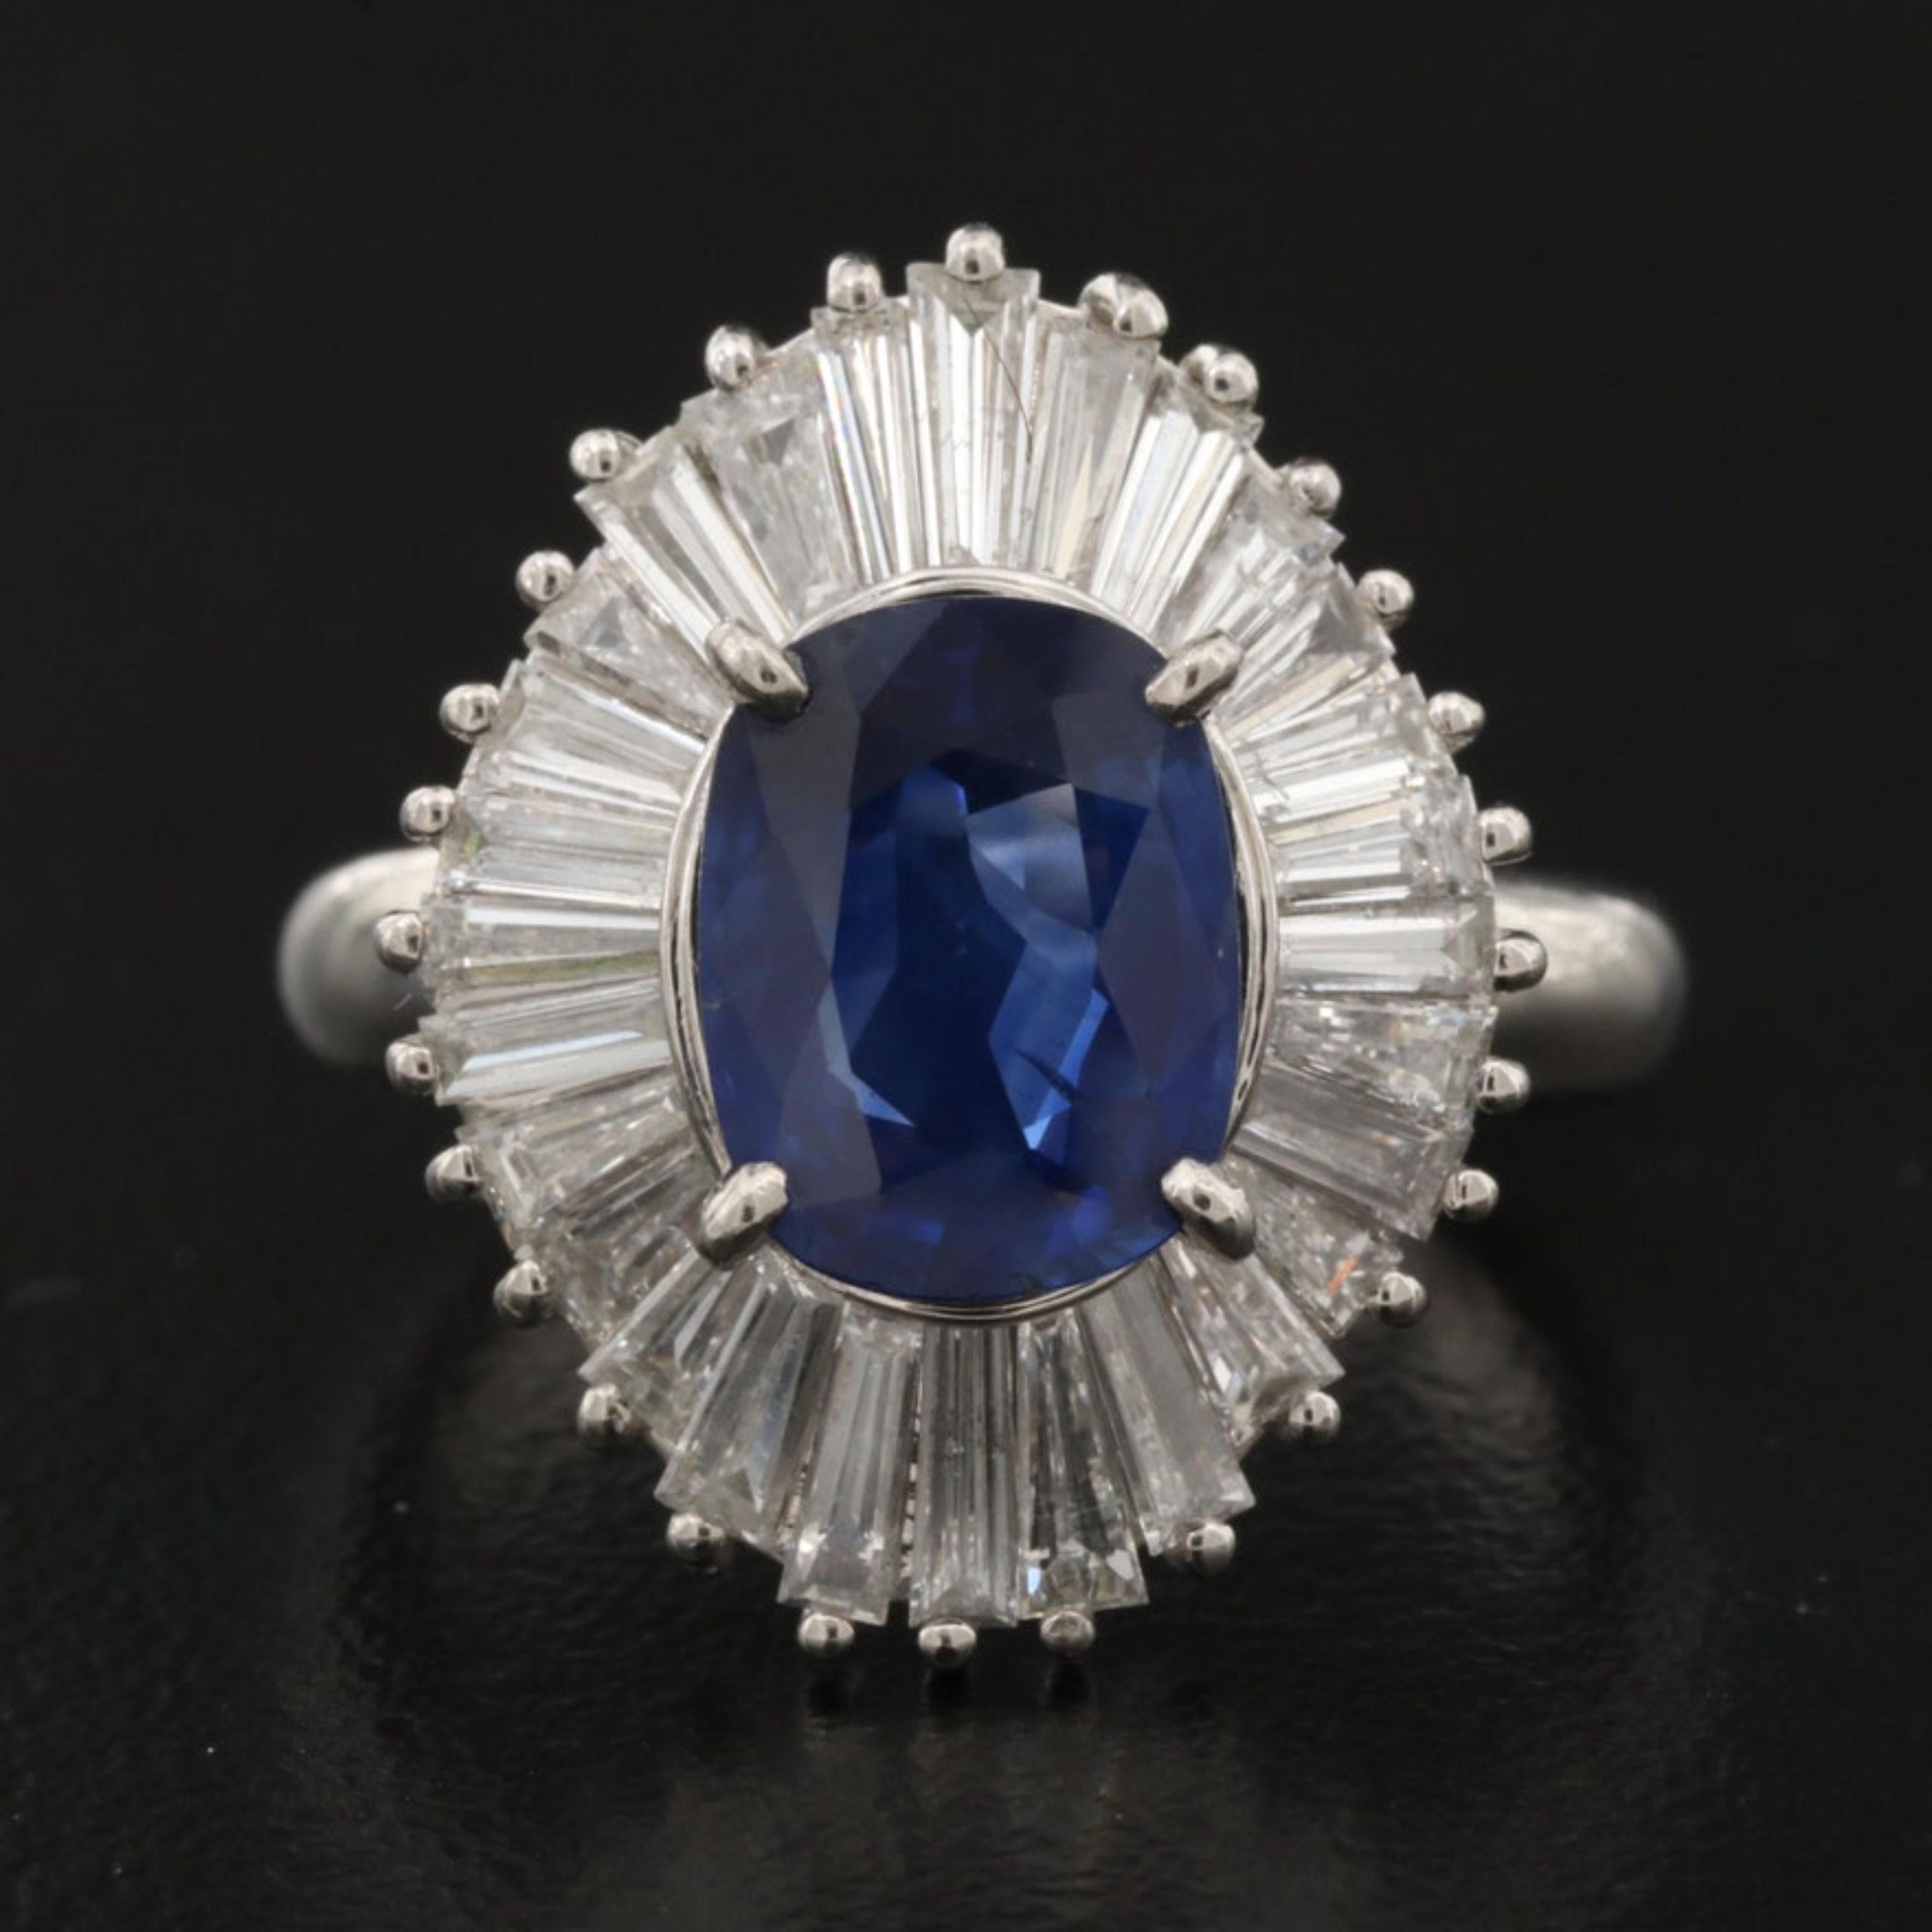 For Sale:  2 Carat Vintage Sapphire Engagement Ring, Halo Sapphire Diamond Cocktail Ring 4